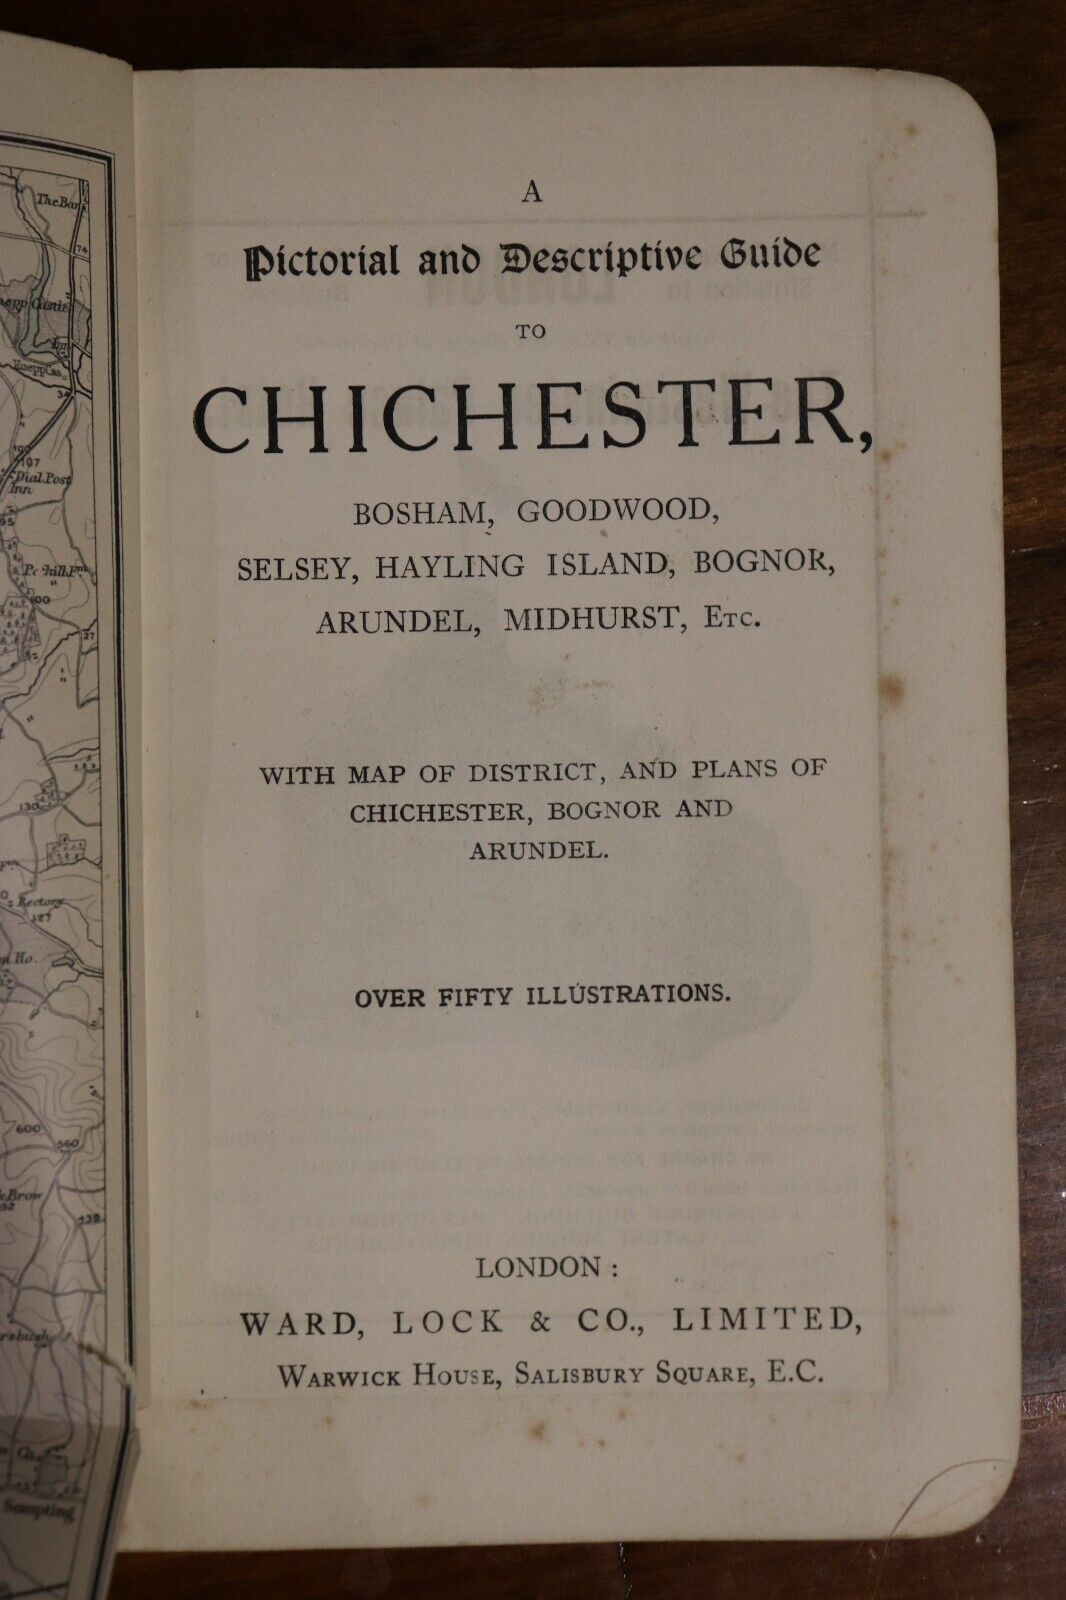 Guide To Chichester: Ward Lock & Co - c1920 - Antique Travel Guide Book w/Maps - 0